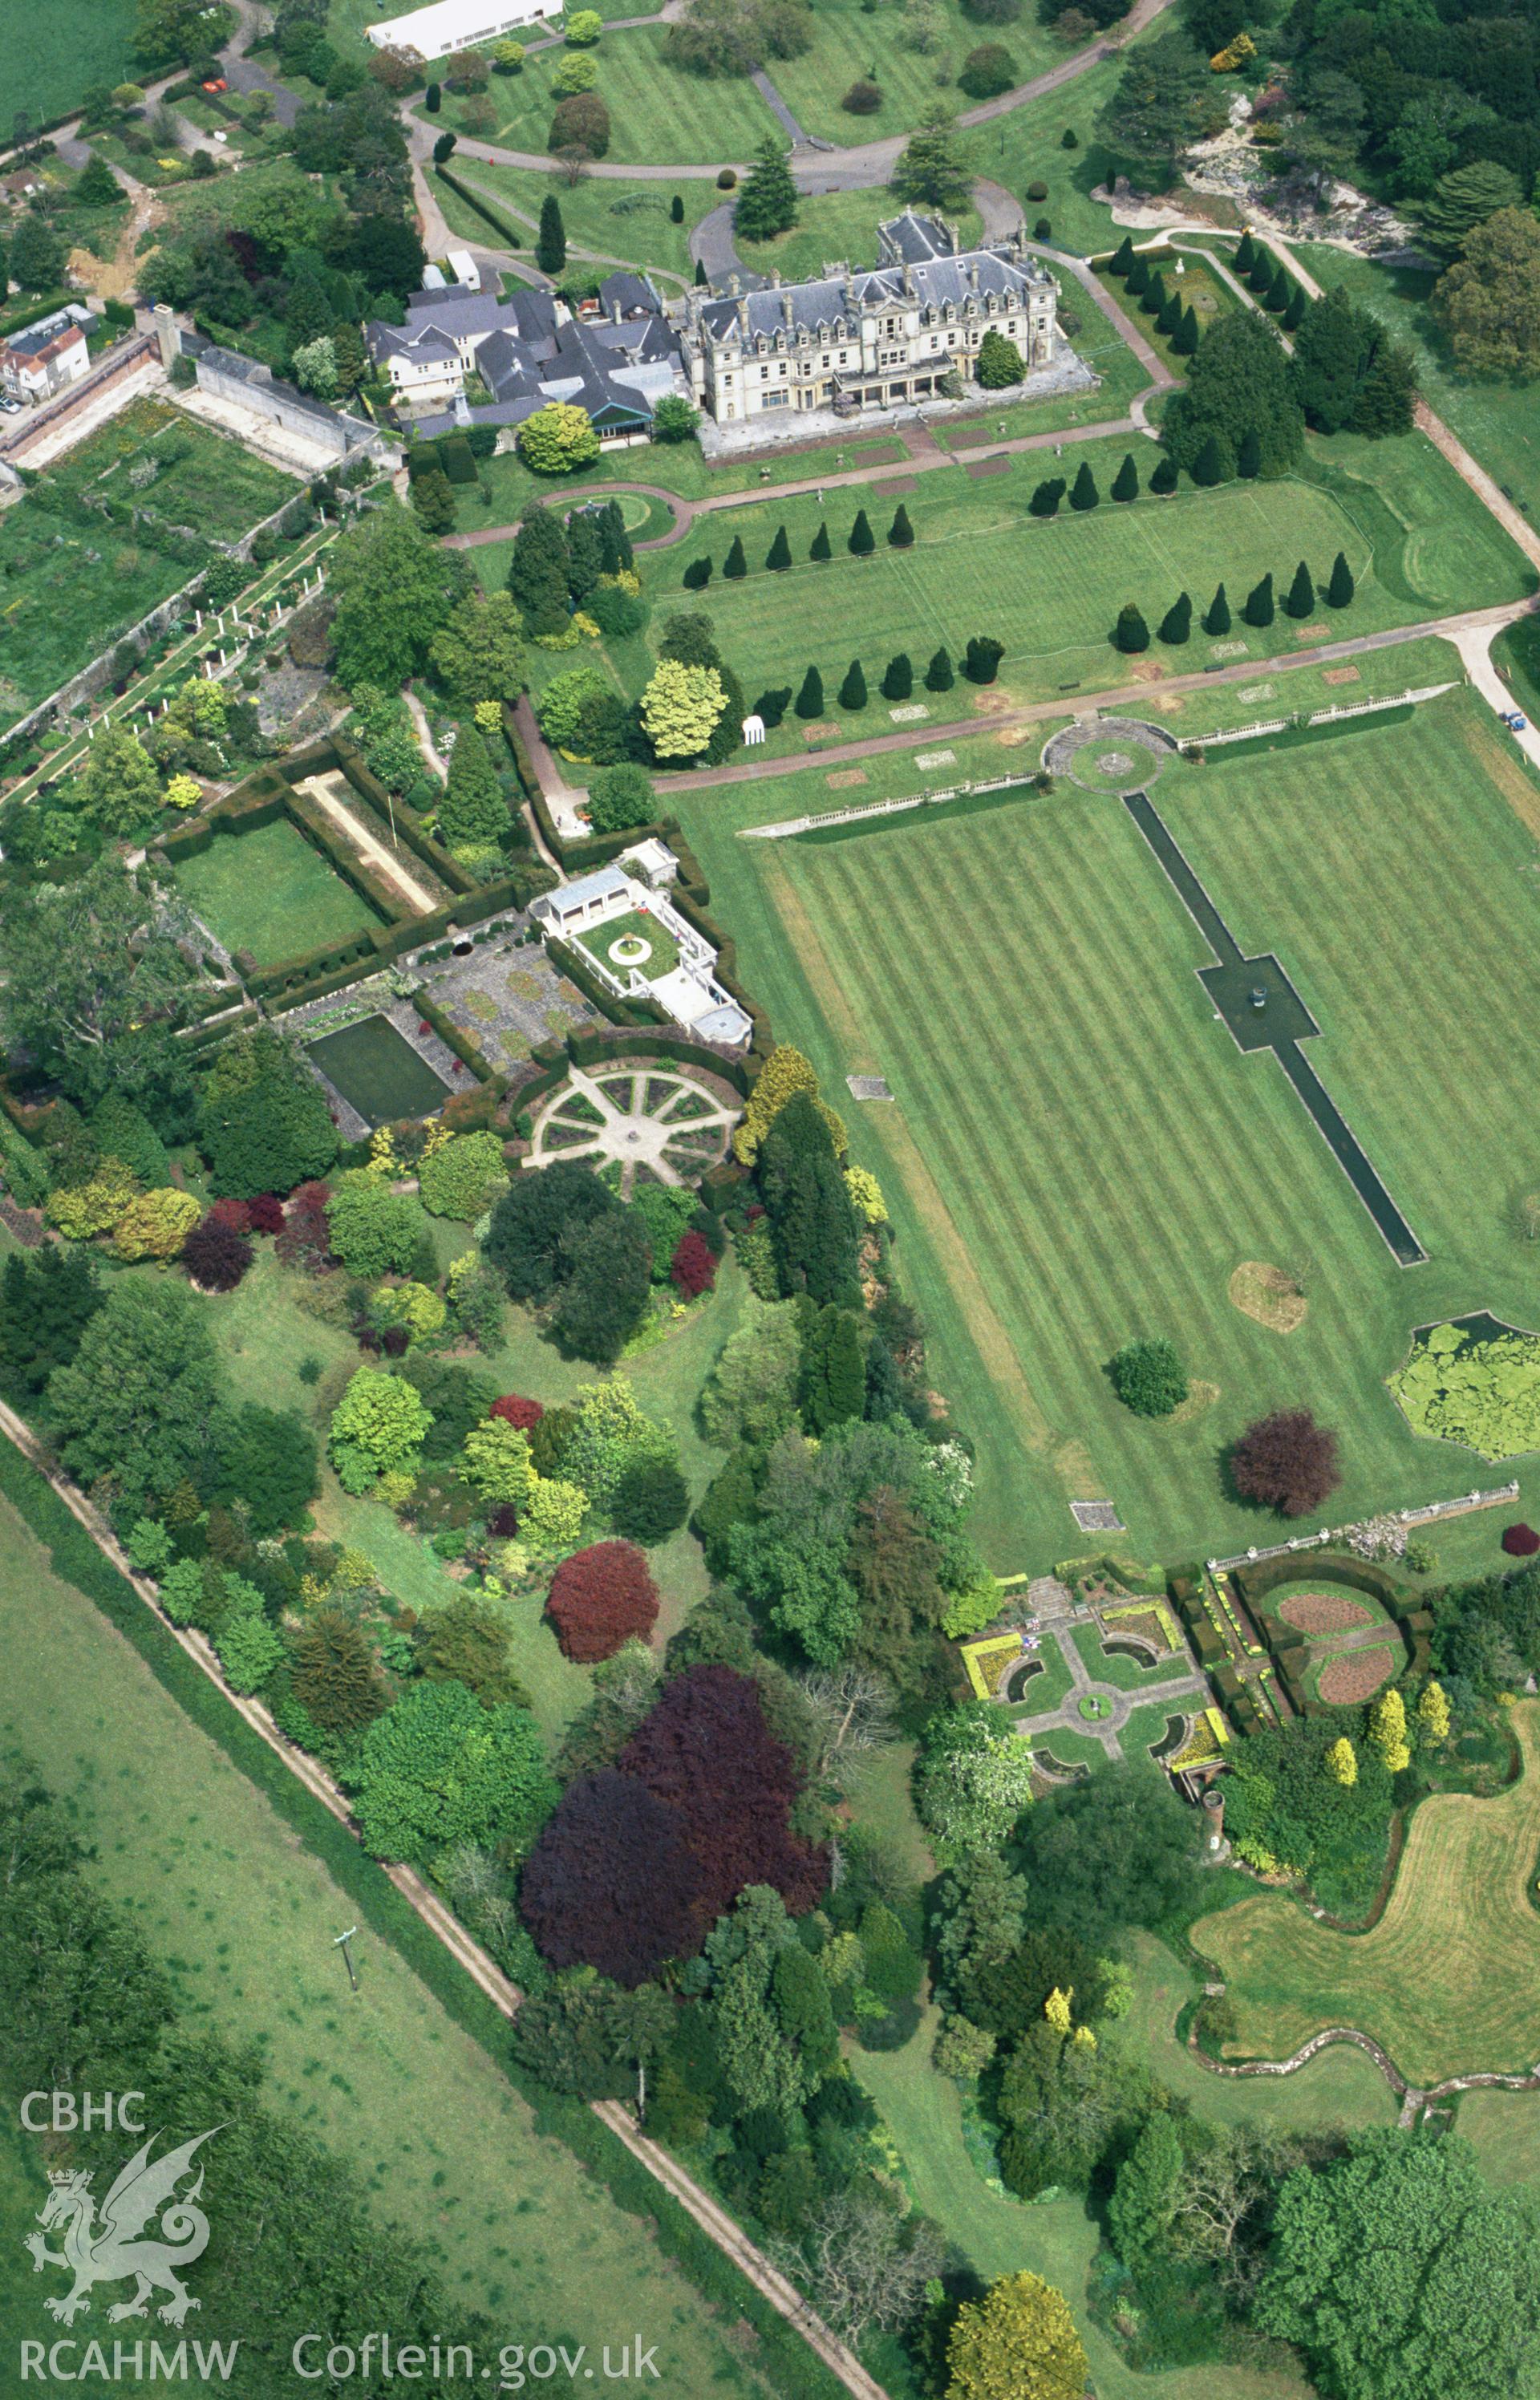 RCAHMW colour oblique aerial photograph of Dyffryn House and Gardens, high view of formal gardens. Taken by Toby Driver on 16/05/2002